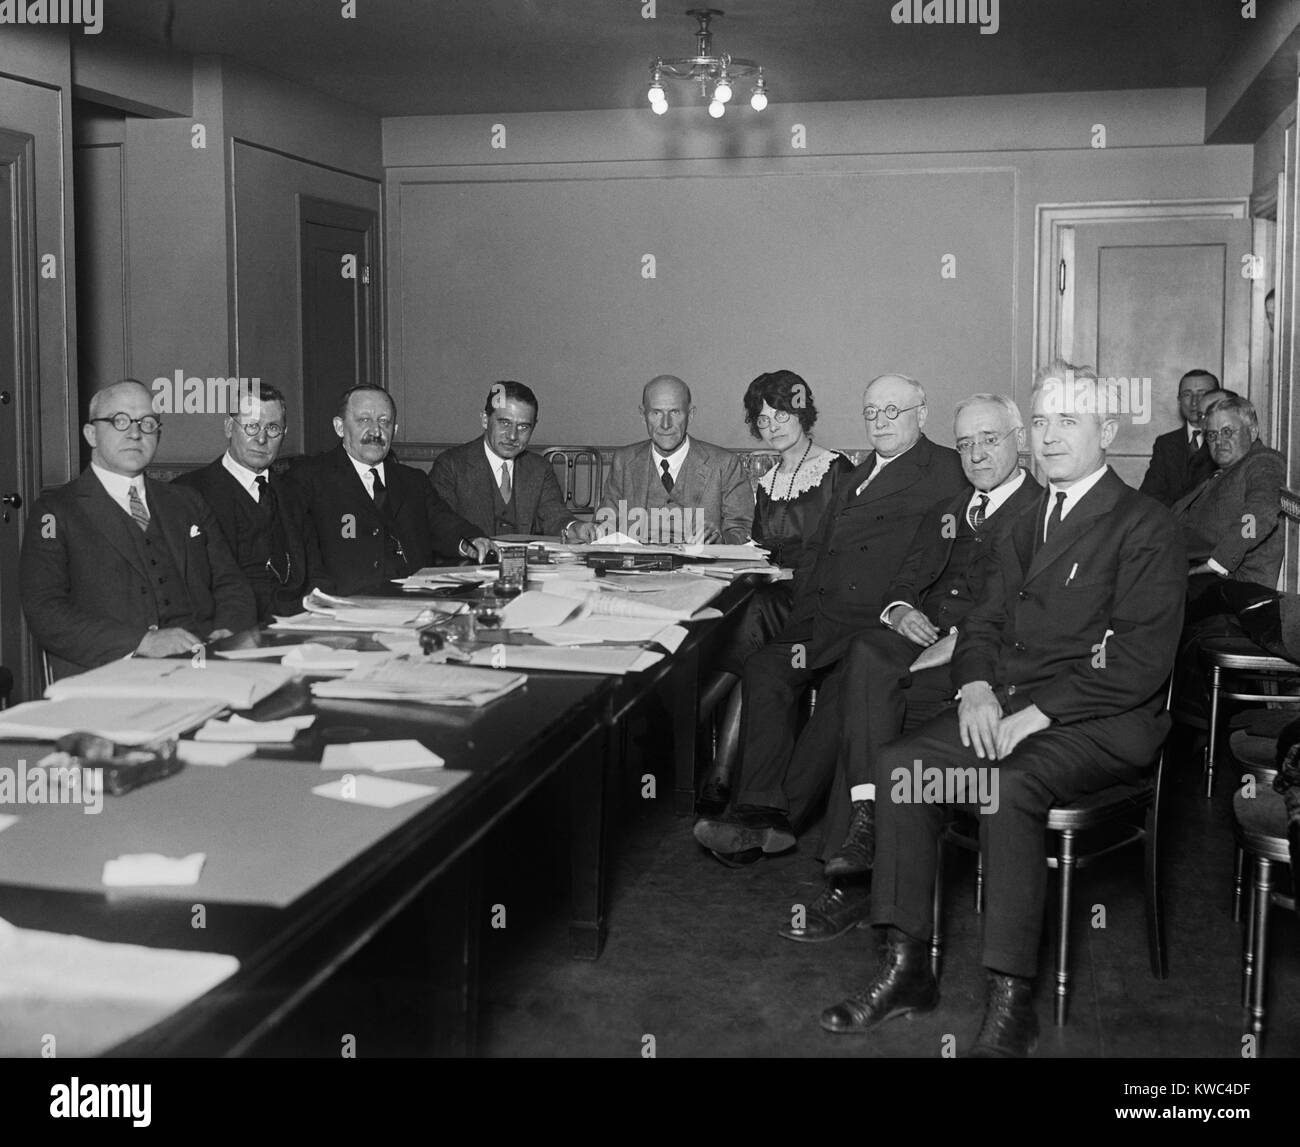 Executive Committee of the Socialist National Party, Dec. 13, 1924. Eugene Debs is at the head of the table. To his left is Bertha Hale White and Rep. Victor Berger of Wisconsin. (BSLOC 2015 15 186) Stock Photo